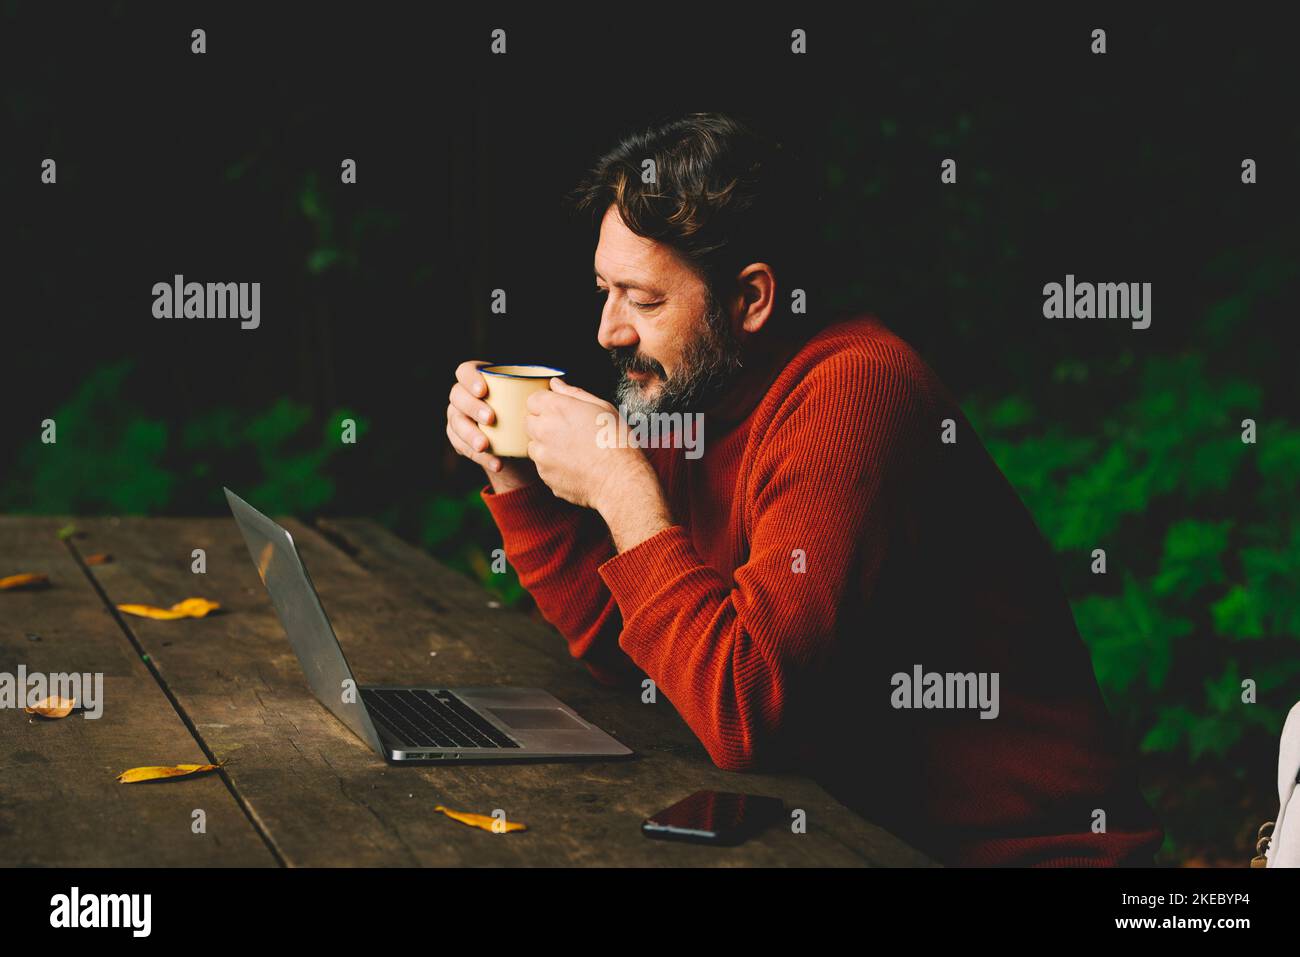 One man using laptop outdoor at the park sitting on a wooden bench with green woods background. Internet connection everywhere and digital nomad job lifestyle people. Using computer and phone device Stock Photo